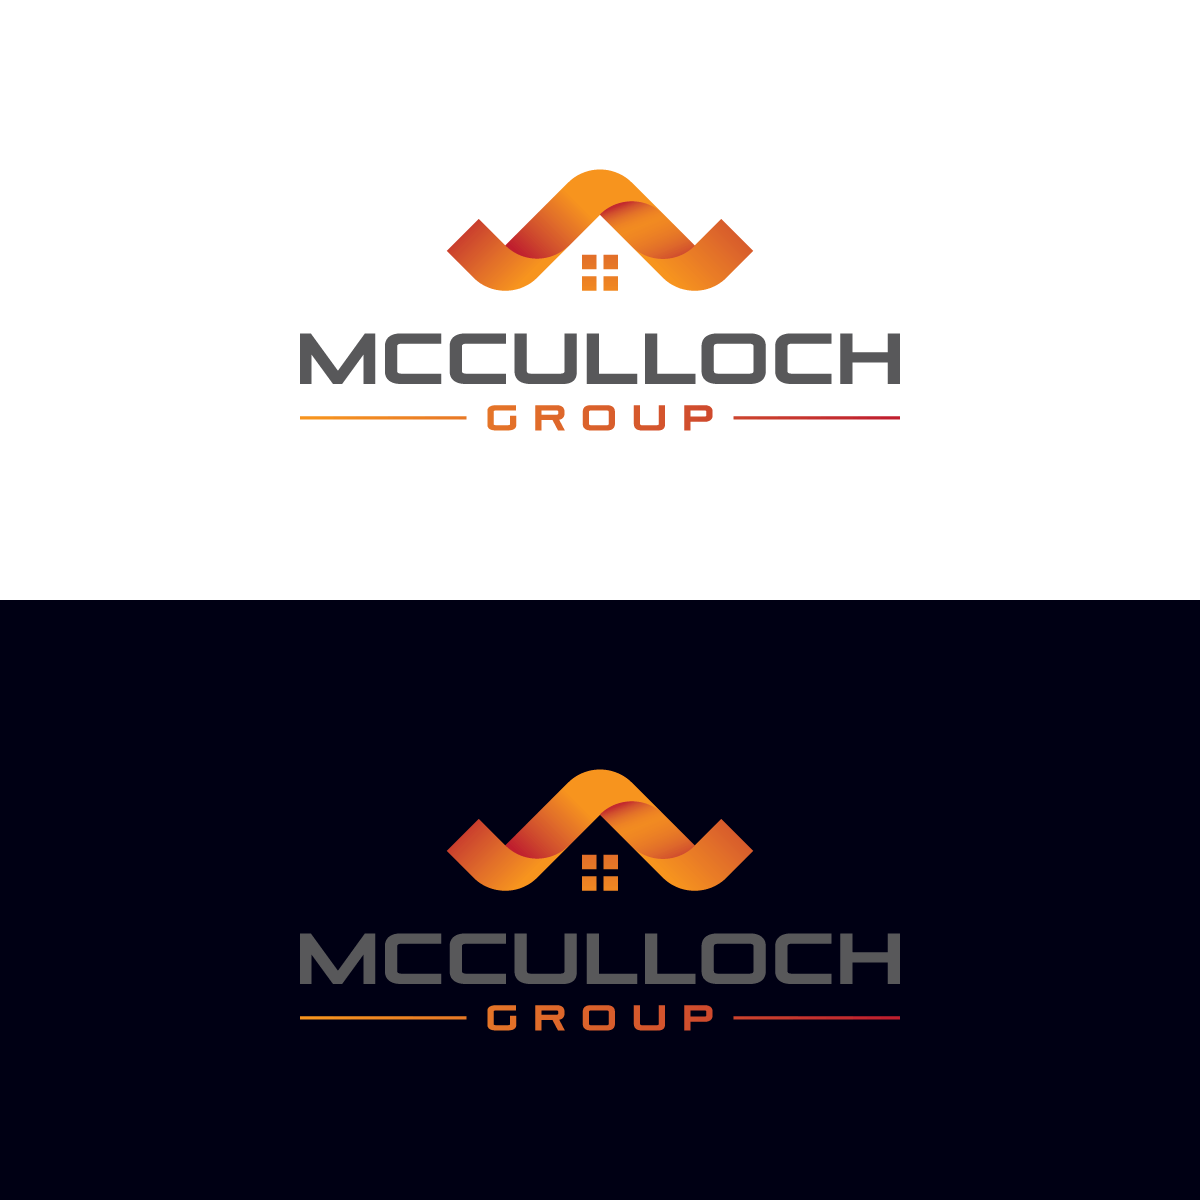 McCulloch Logo - Modern, Professional Logo Design for McCulloch Group by Logoplain ...